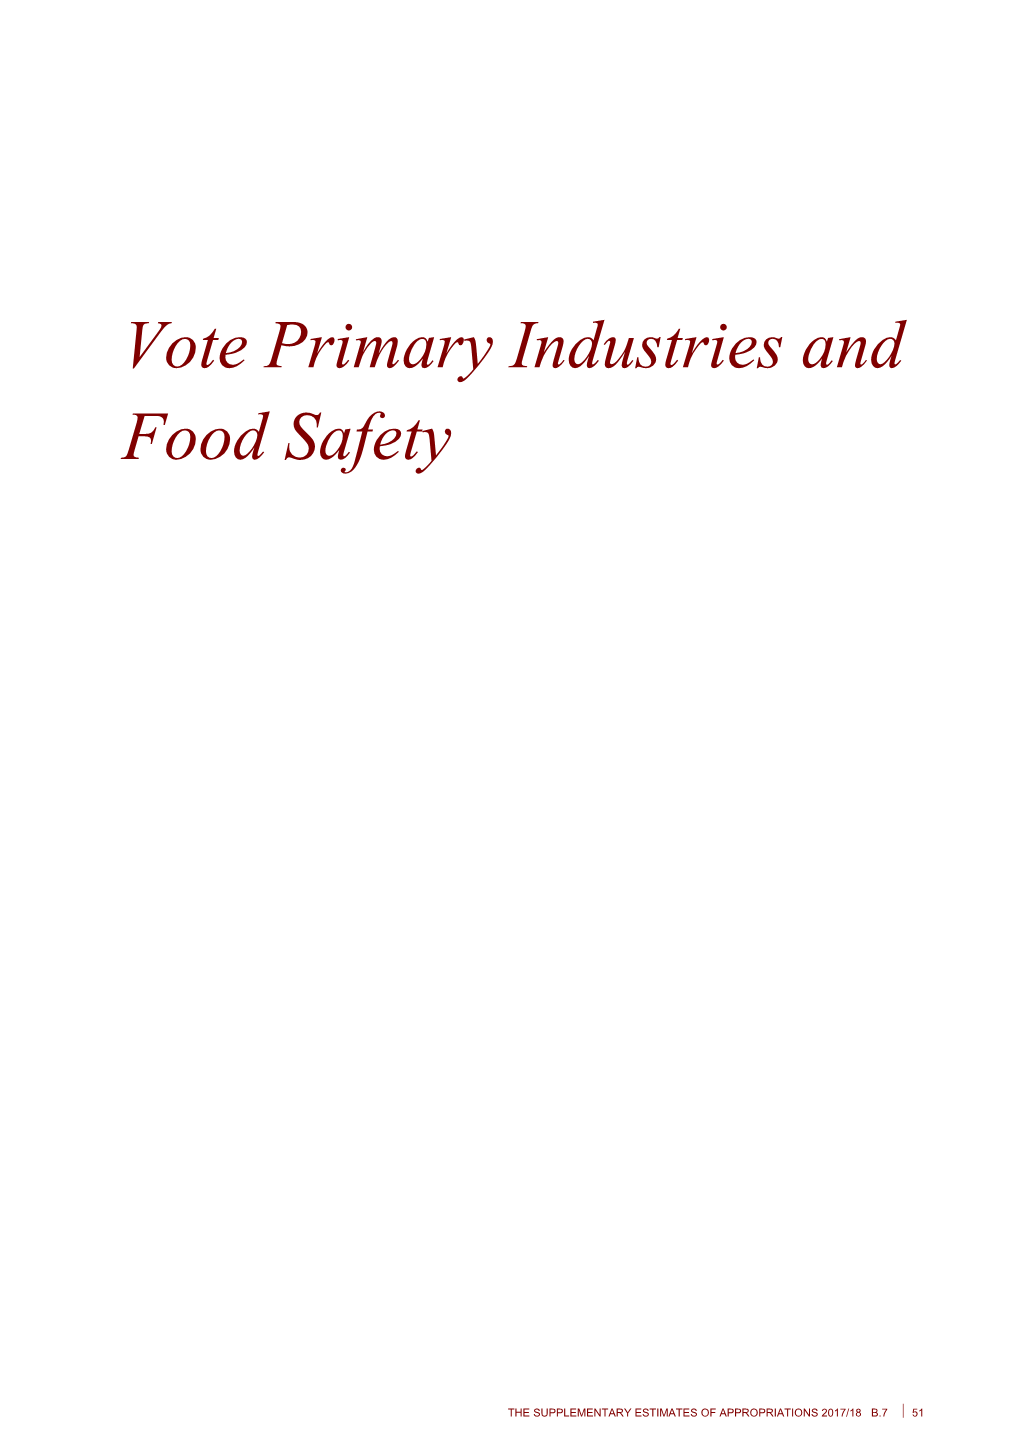 Vote Primary Industries and Food Safety - Supplementary Estimates 2017/18 - Budget 2018